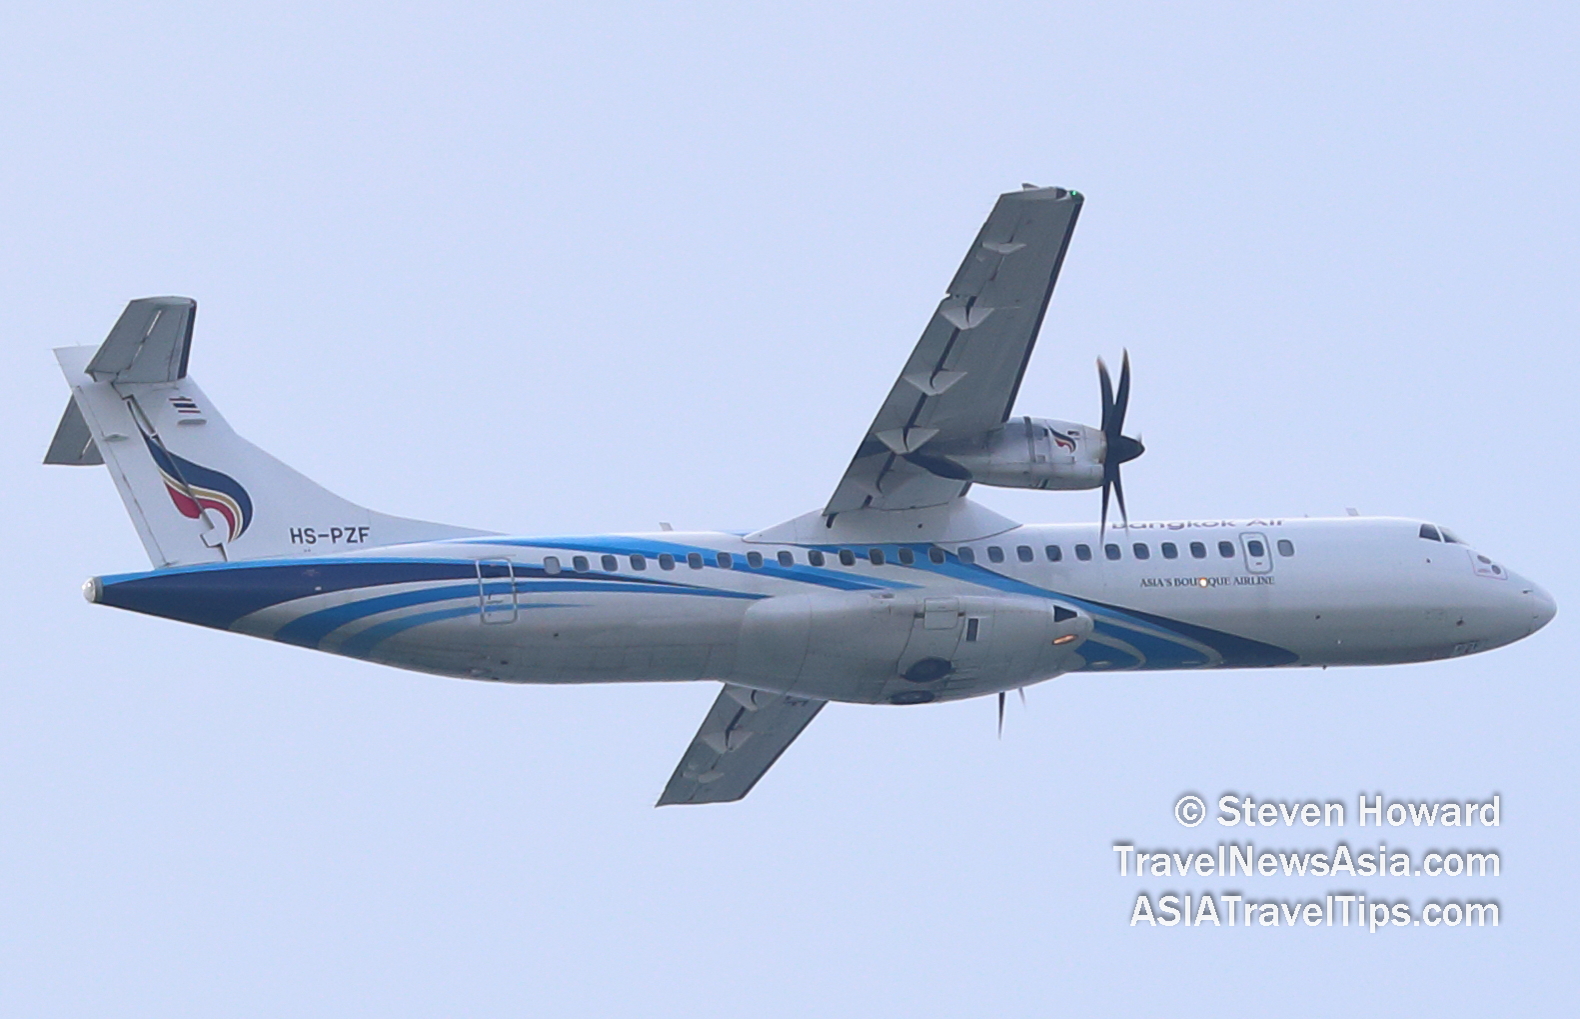 Bangkok Airways ATR 72-600 reg: HS-PZF. Picture by Steven Howard of TravelNewsAsia.com Click to enlarge.